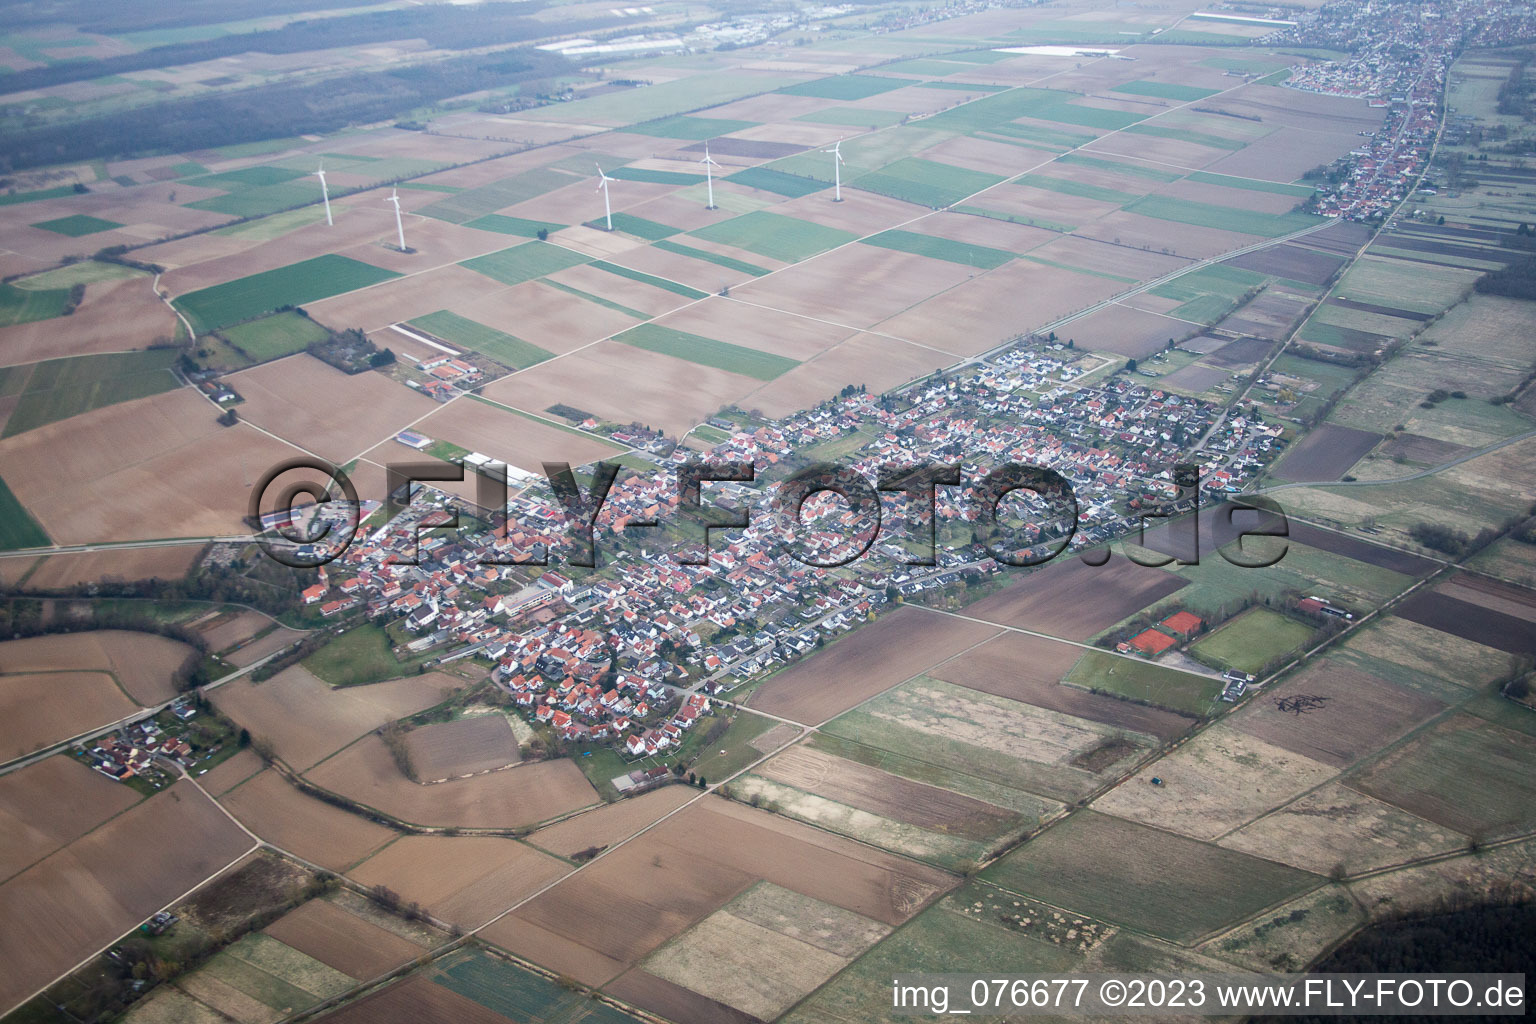 Minfeld in the state Rhineland-Palatinate, Germany seen from above